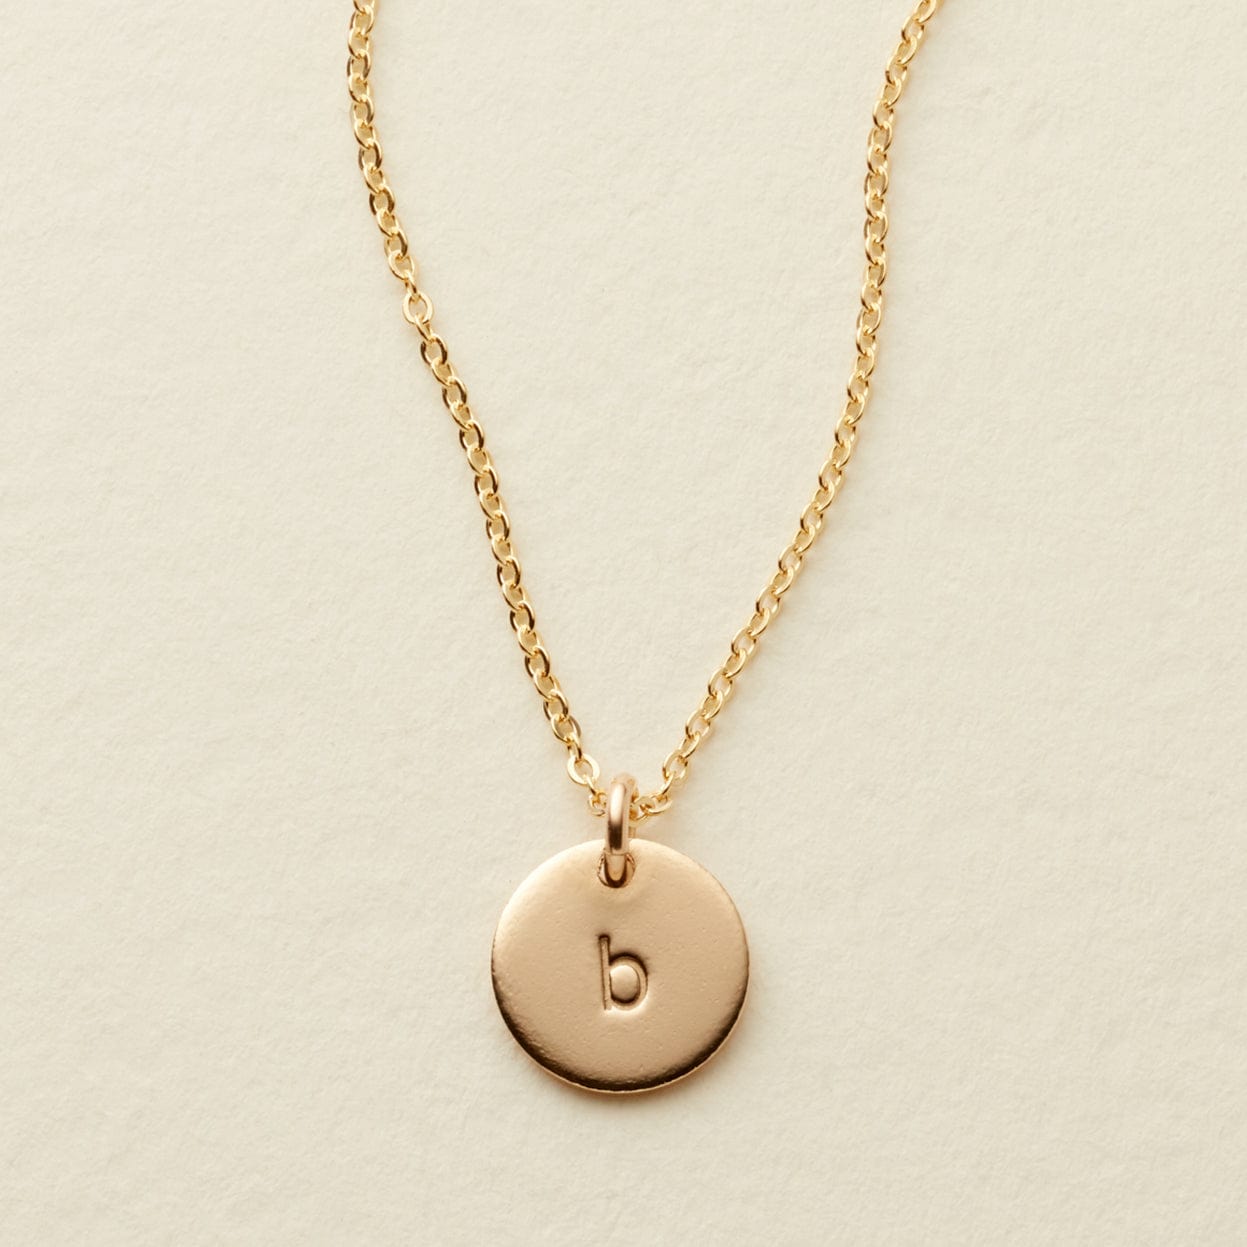 Initial Disc Necklace - 3/8" Gold Filled / 16"-18" / 1 Disc Necklace